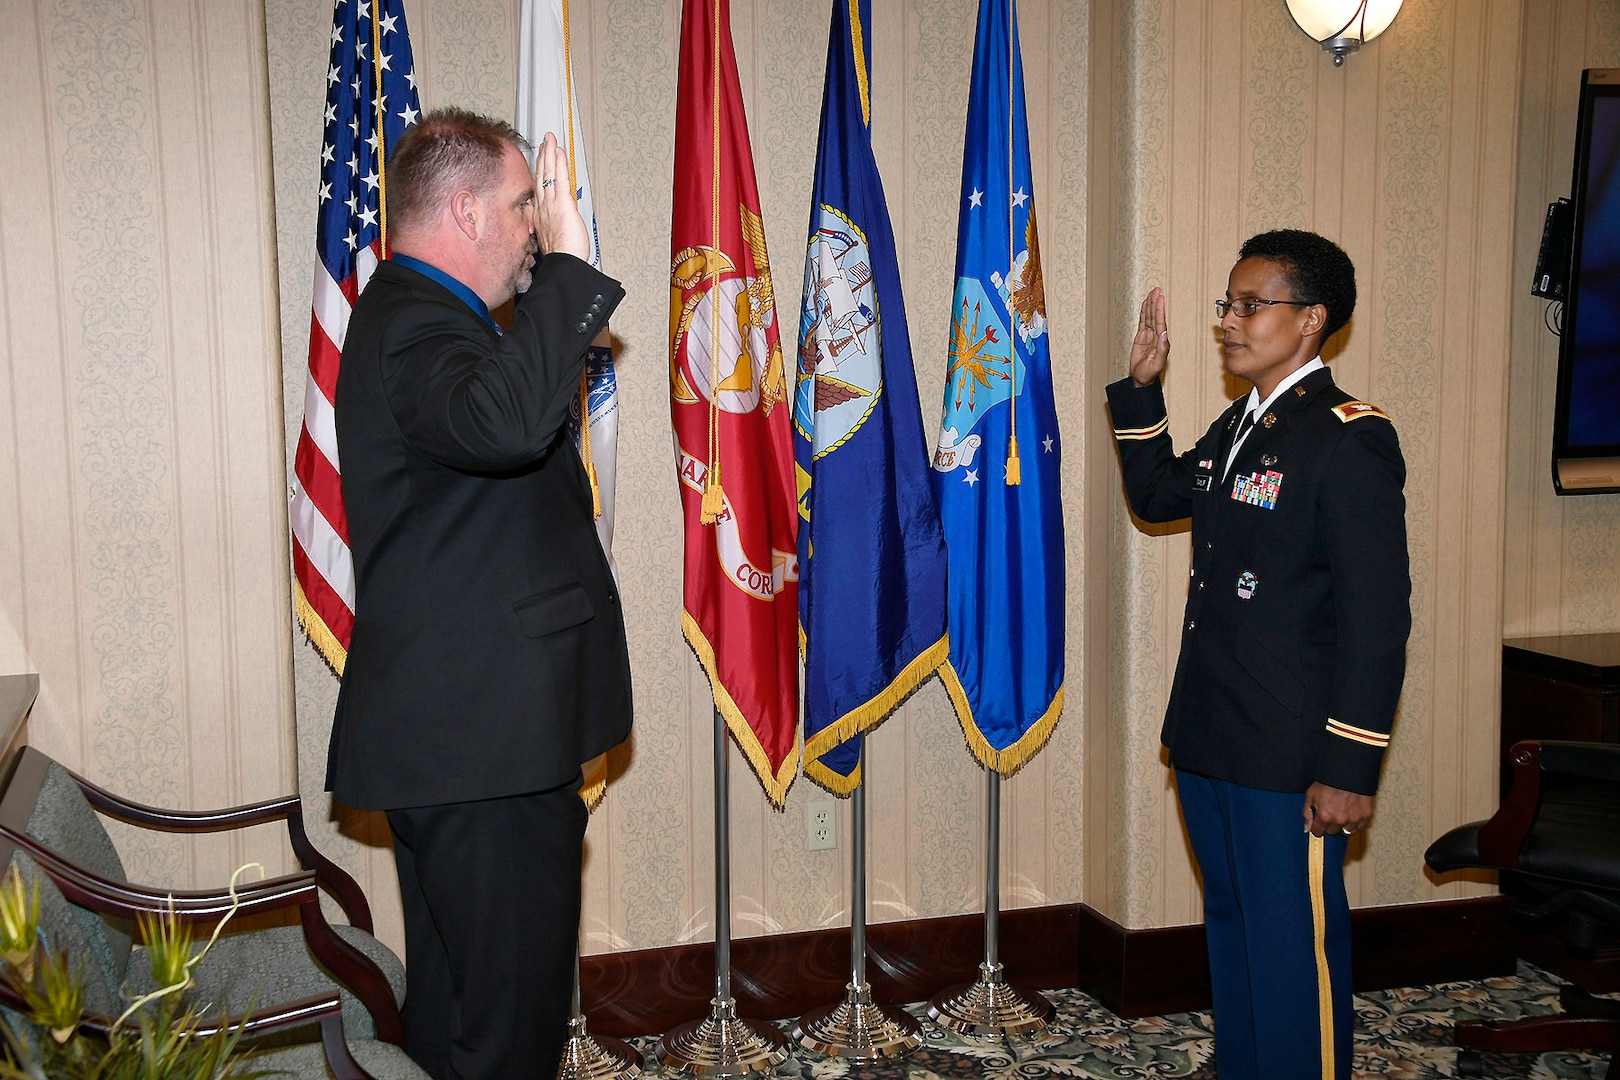 Man in suit and woman in uniform both stand in facing eachother in front of flags with their right hand raised